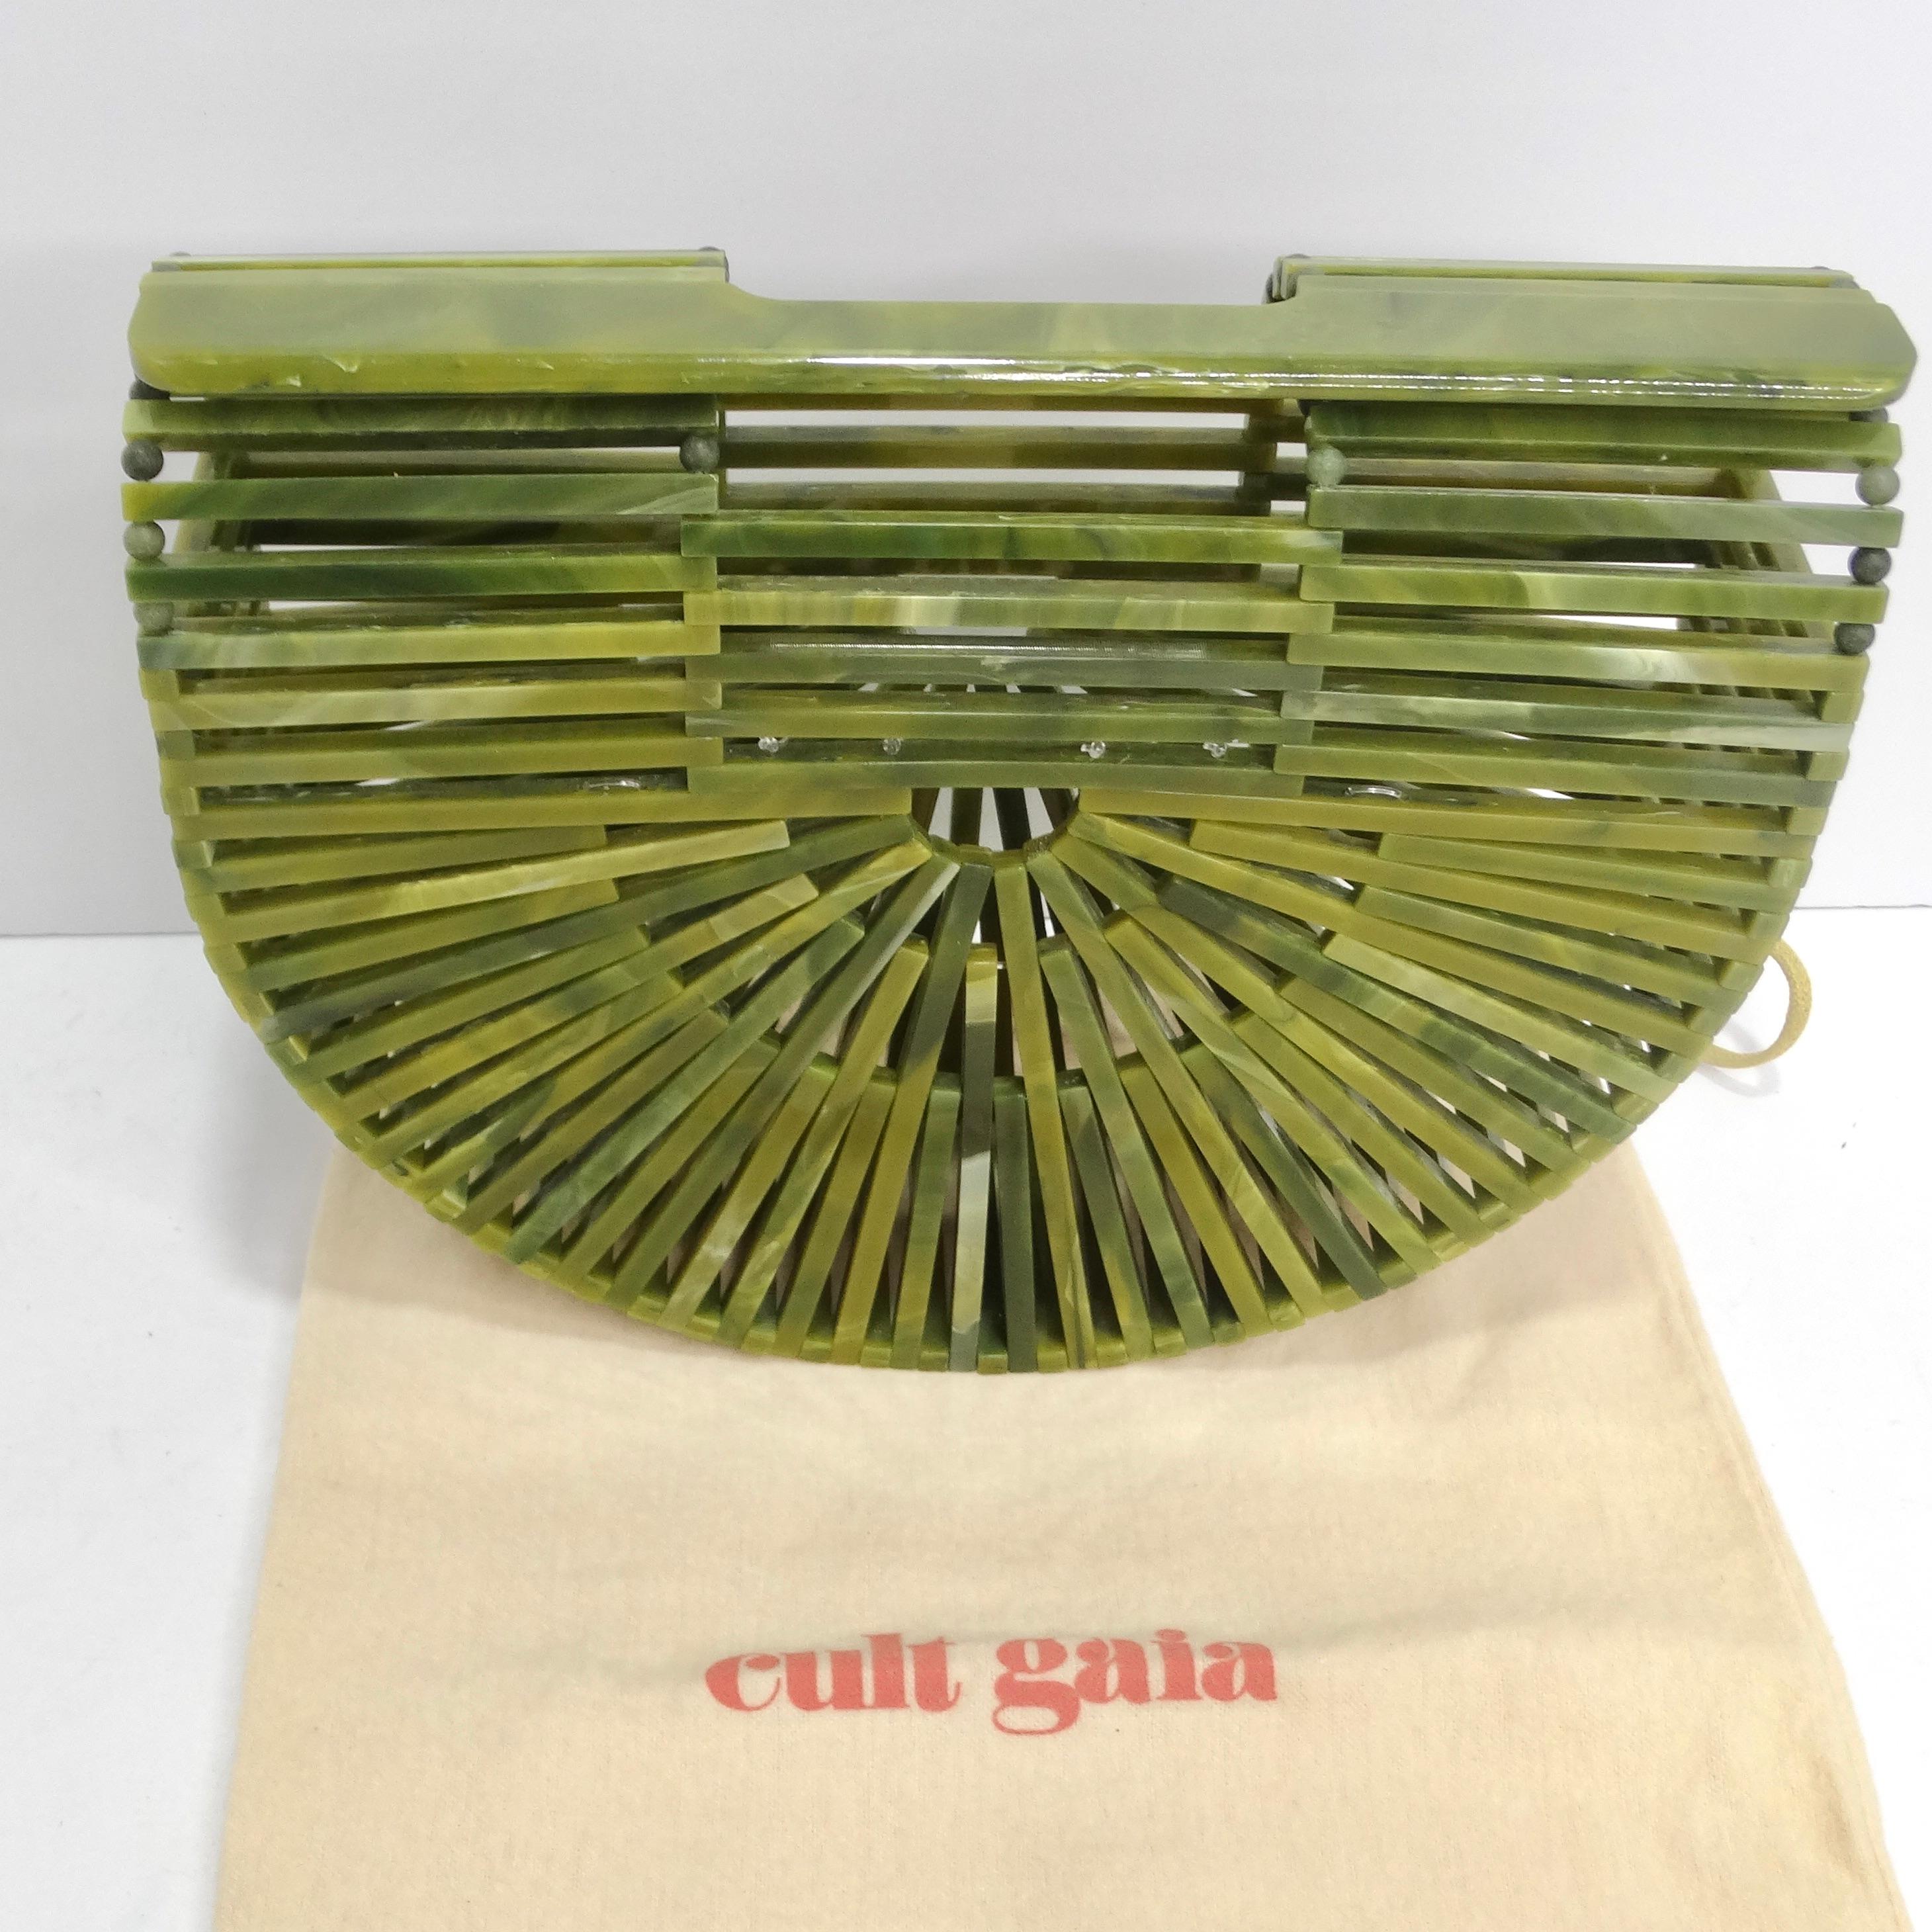 Introducing a clutch that's not just an accessory; it's a work of art - the Cult Gaia Acrylic Ark Bag in Gorgeous Green. This clutch takes fashion to a new level with its signature sun ray motif in glossy jade acrylic, meticulously handcrafted to